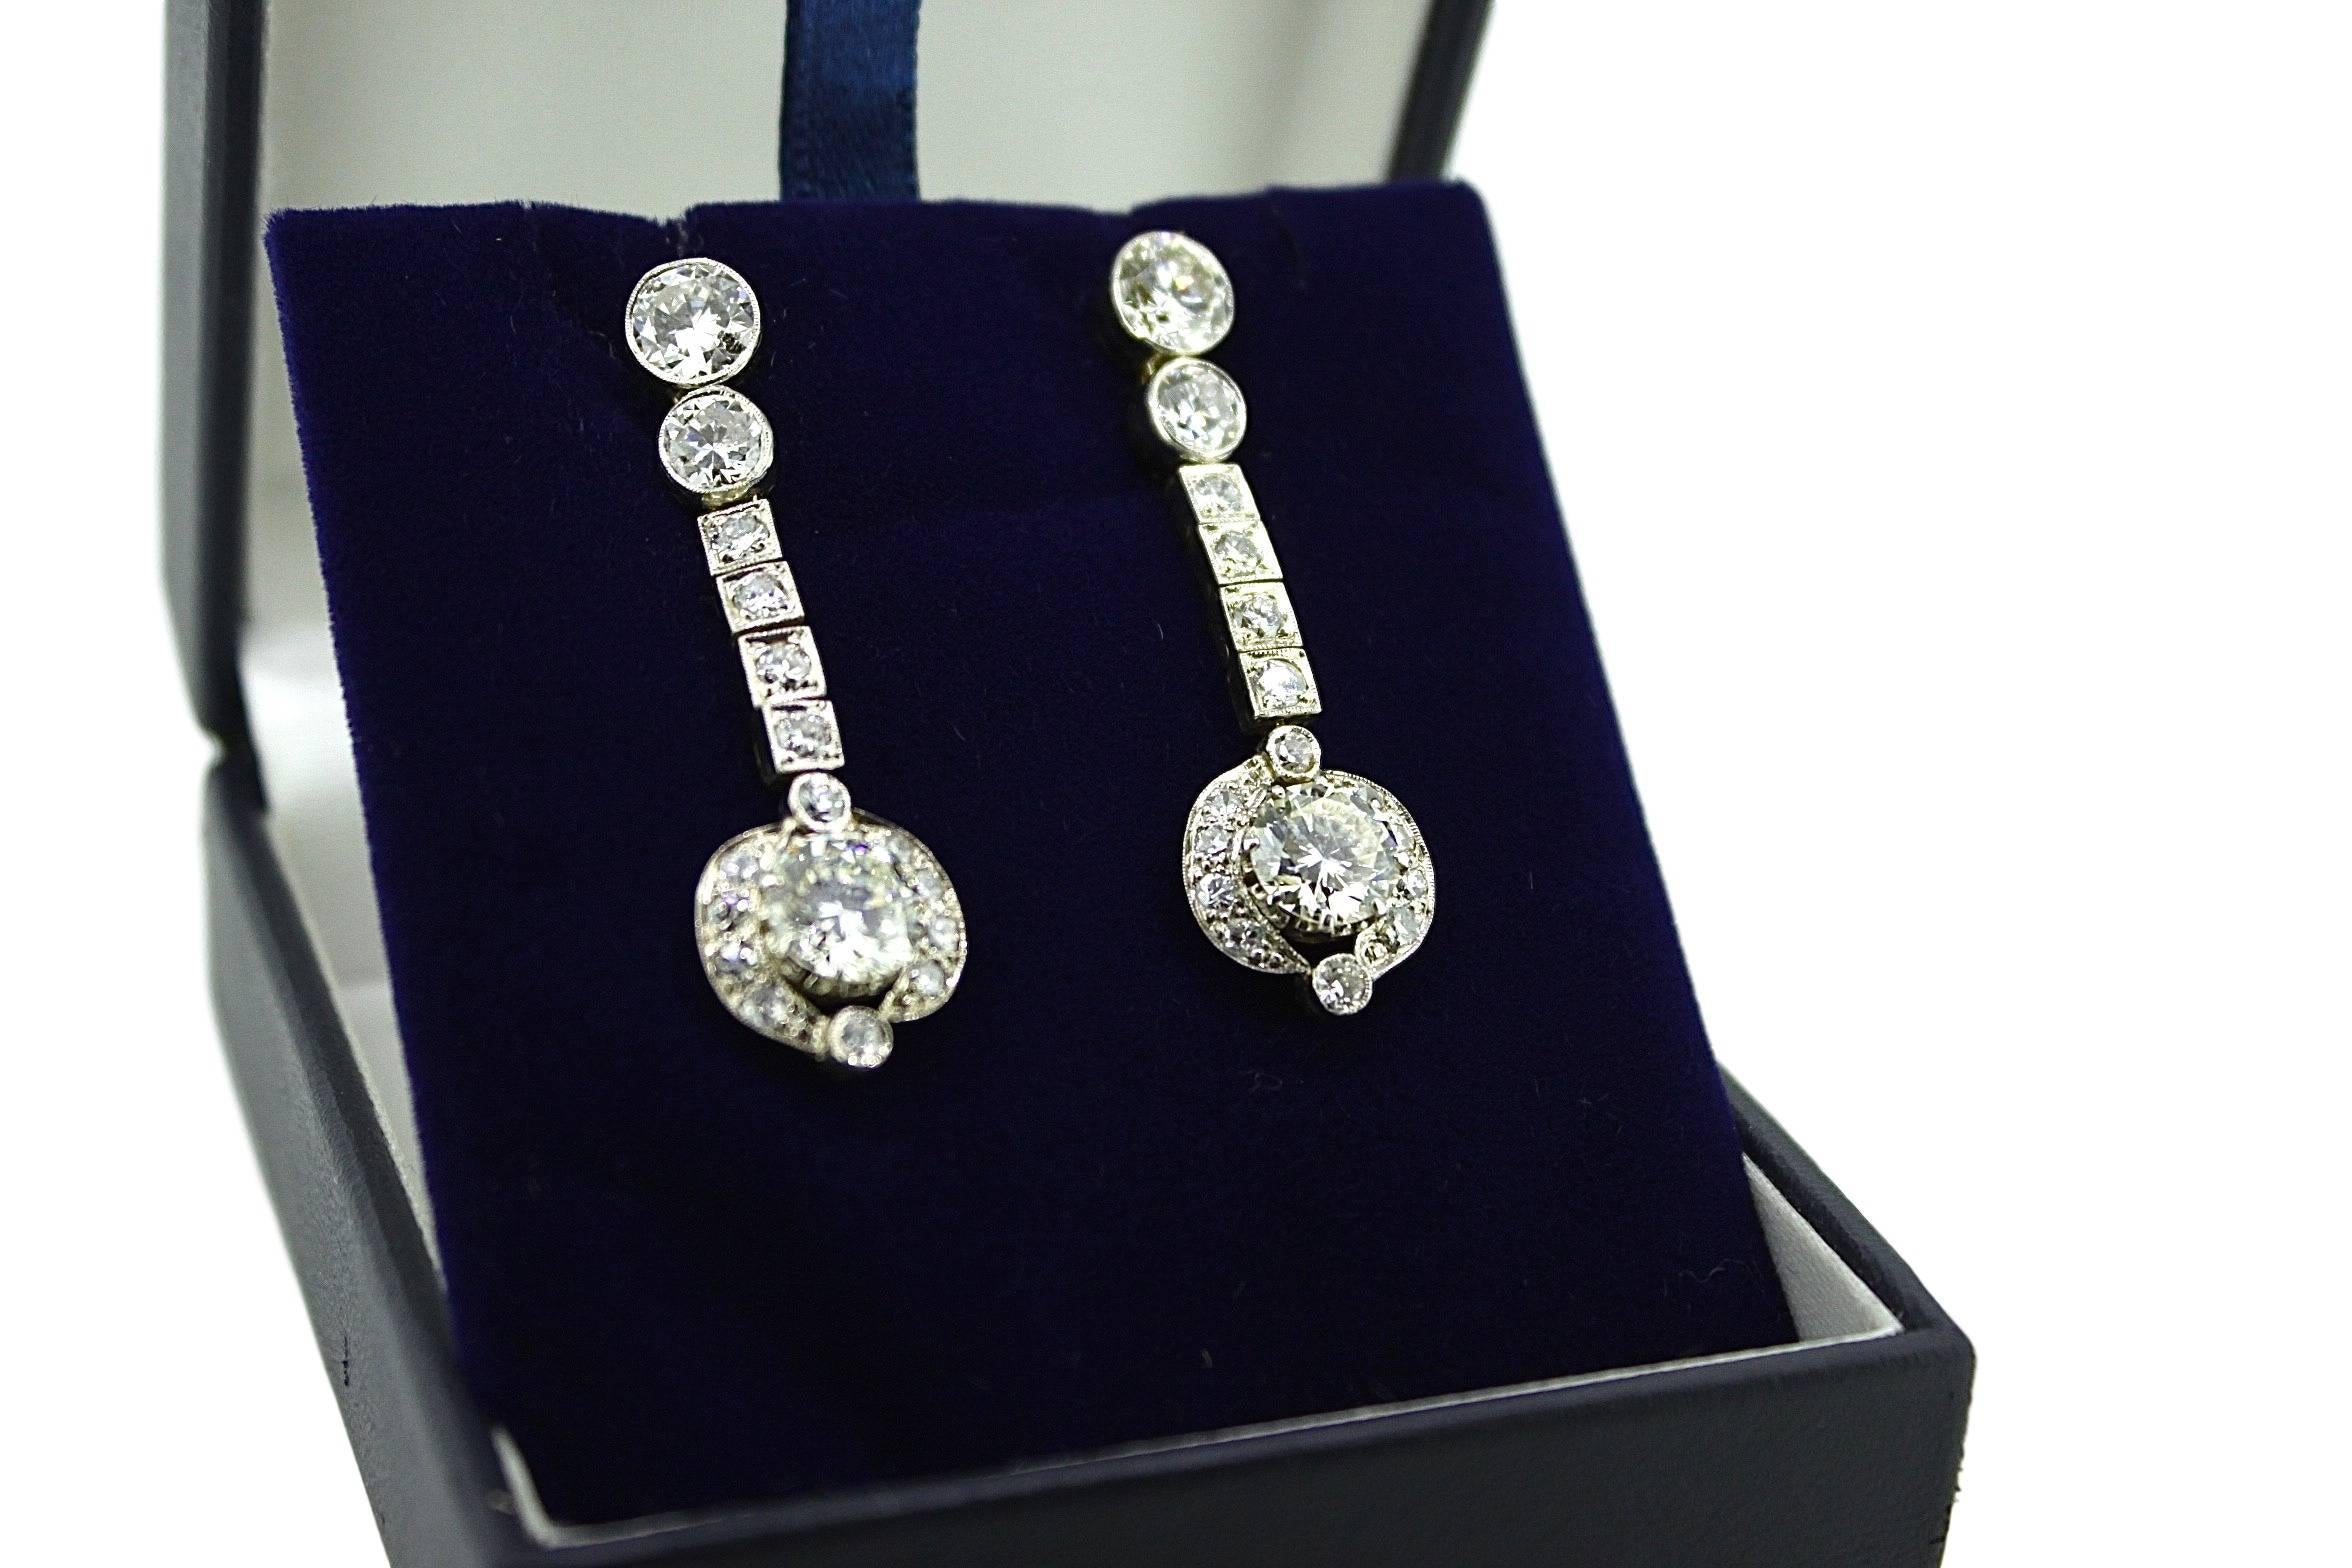 We proudly present you these wonderfull Art-Deco earrings made in the 1930's.
The quality of the diamonds is exceptional and are set in deferent techniques.
The total carat amount is 8.04 ct and the overall grade is from H till J, the nearly